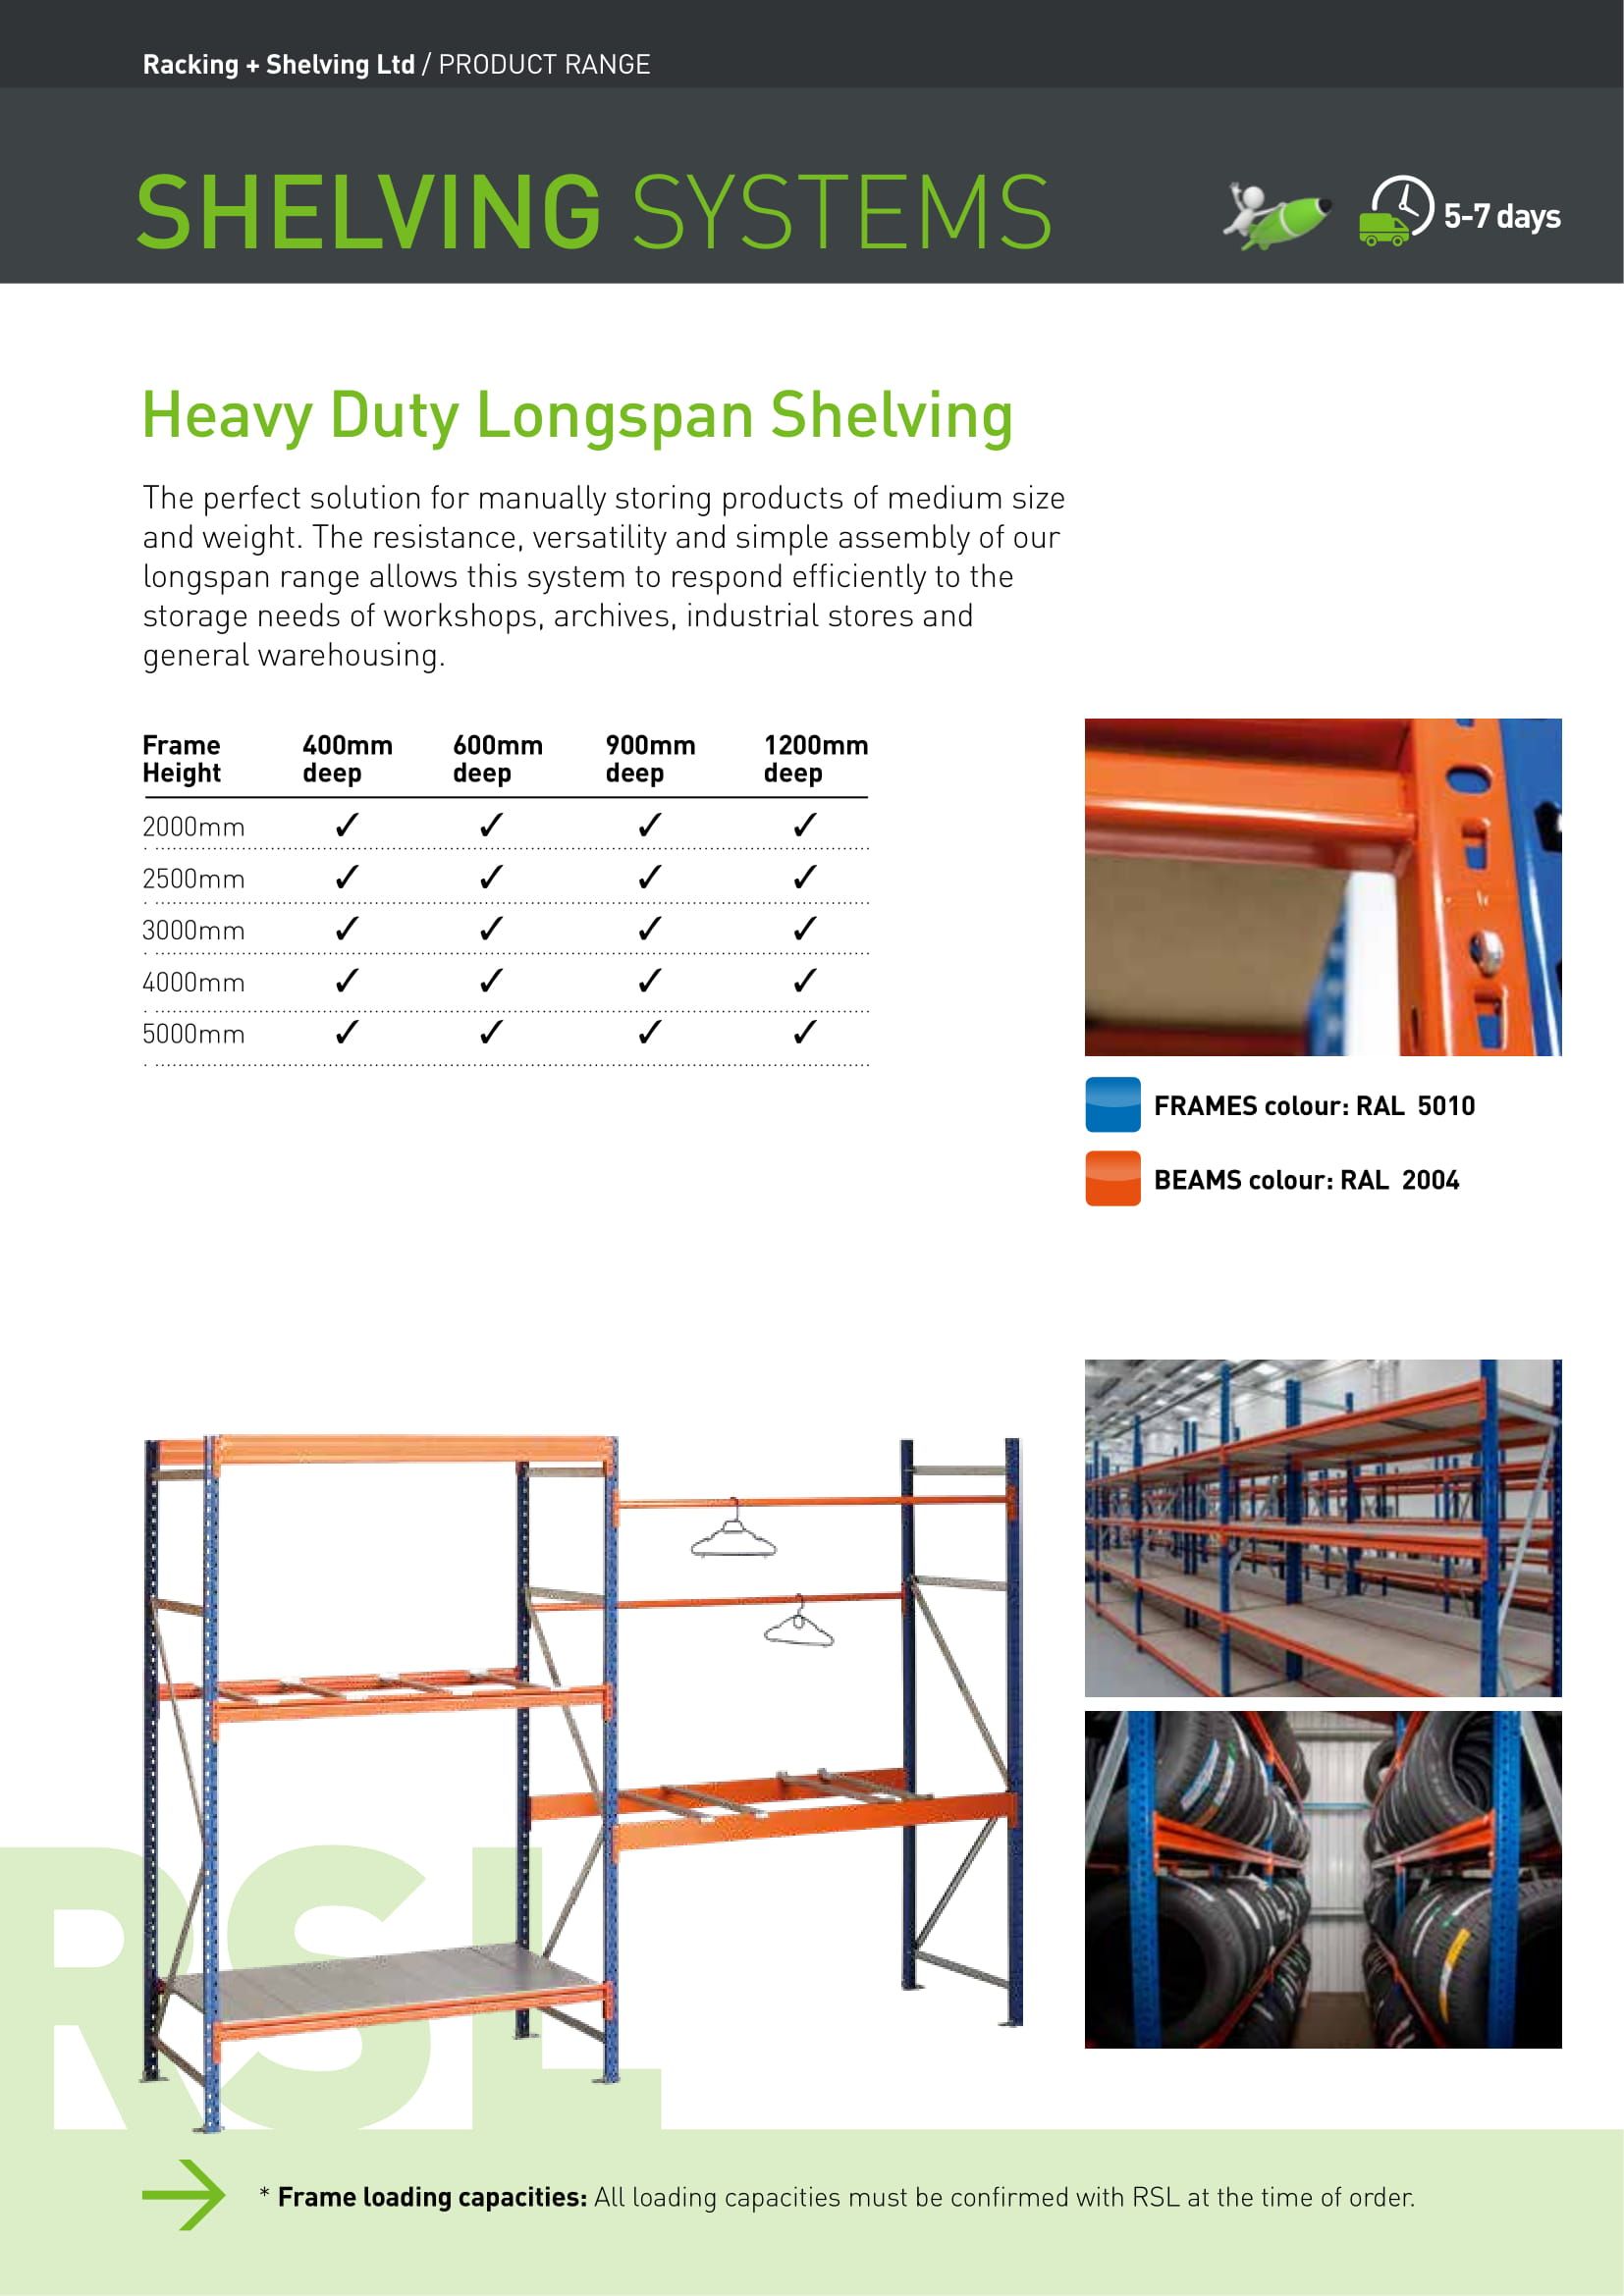 Shelving systems brochure page featuring heavy duty shelving